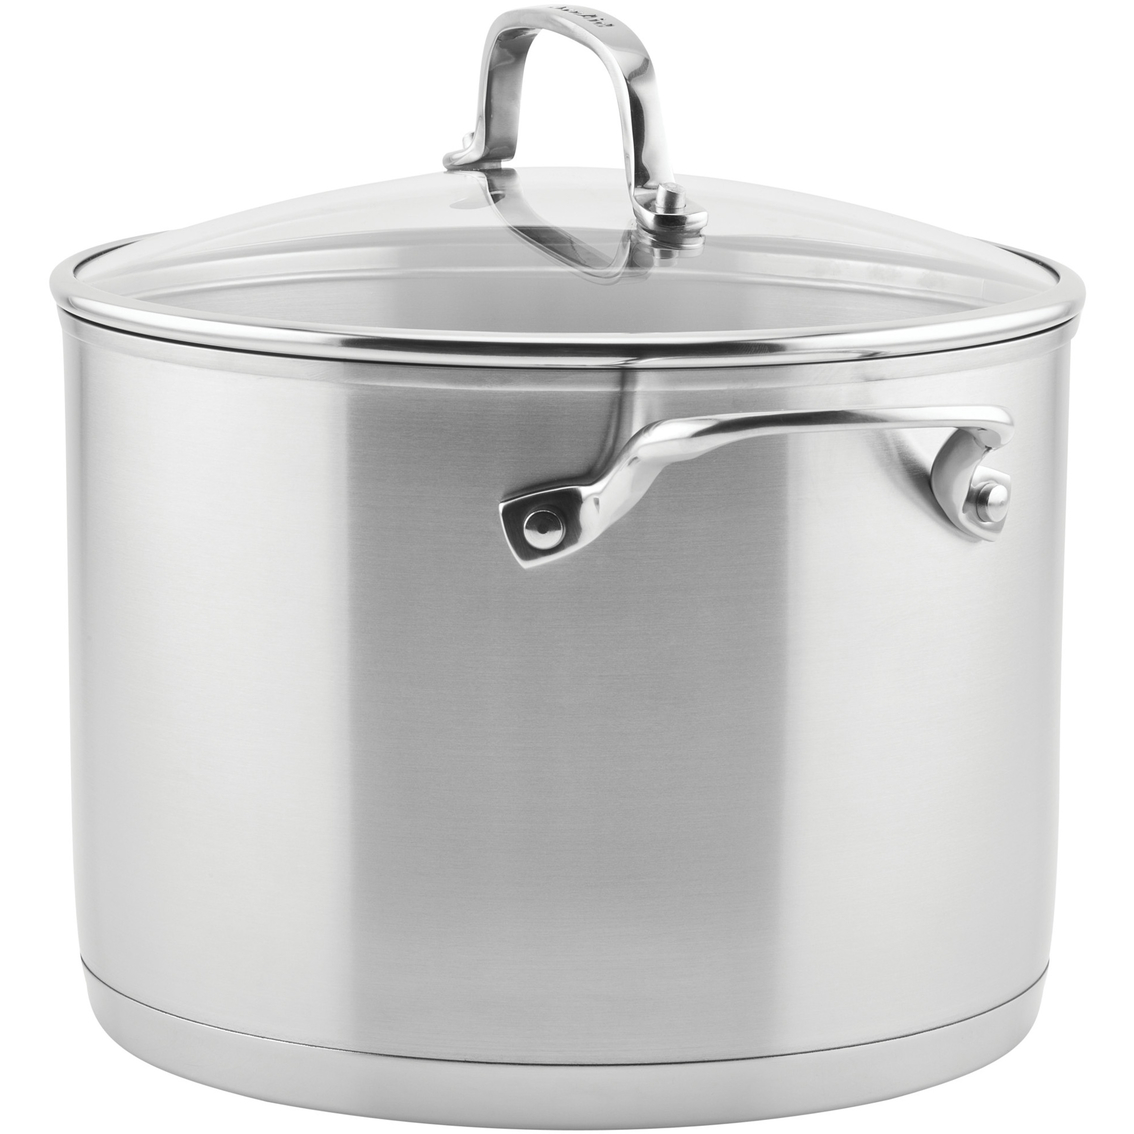 KitchenAid 8 qt. 3 Ply Base Stainless Steel Stockpot with Measuring Marks and Lid - Image 2 of 10